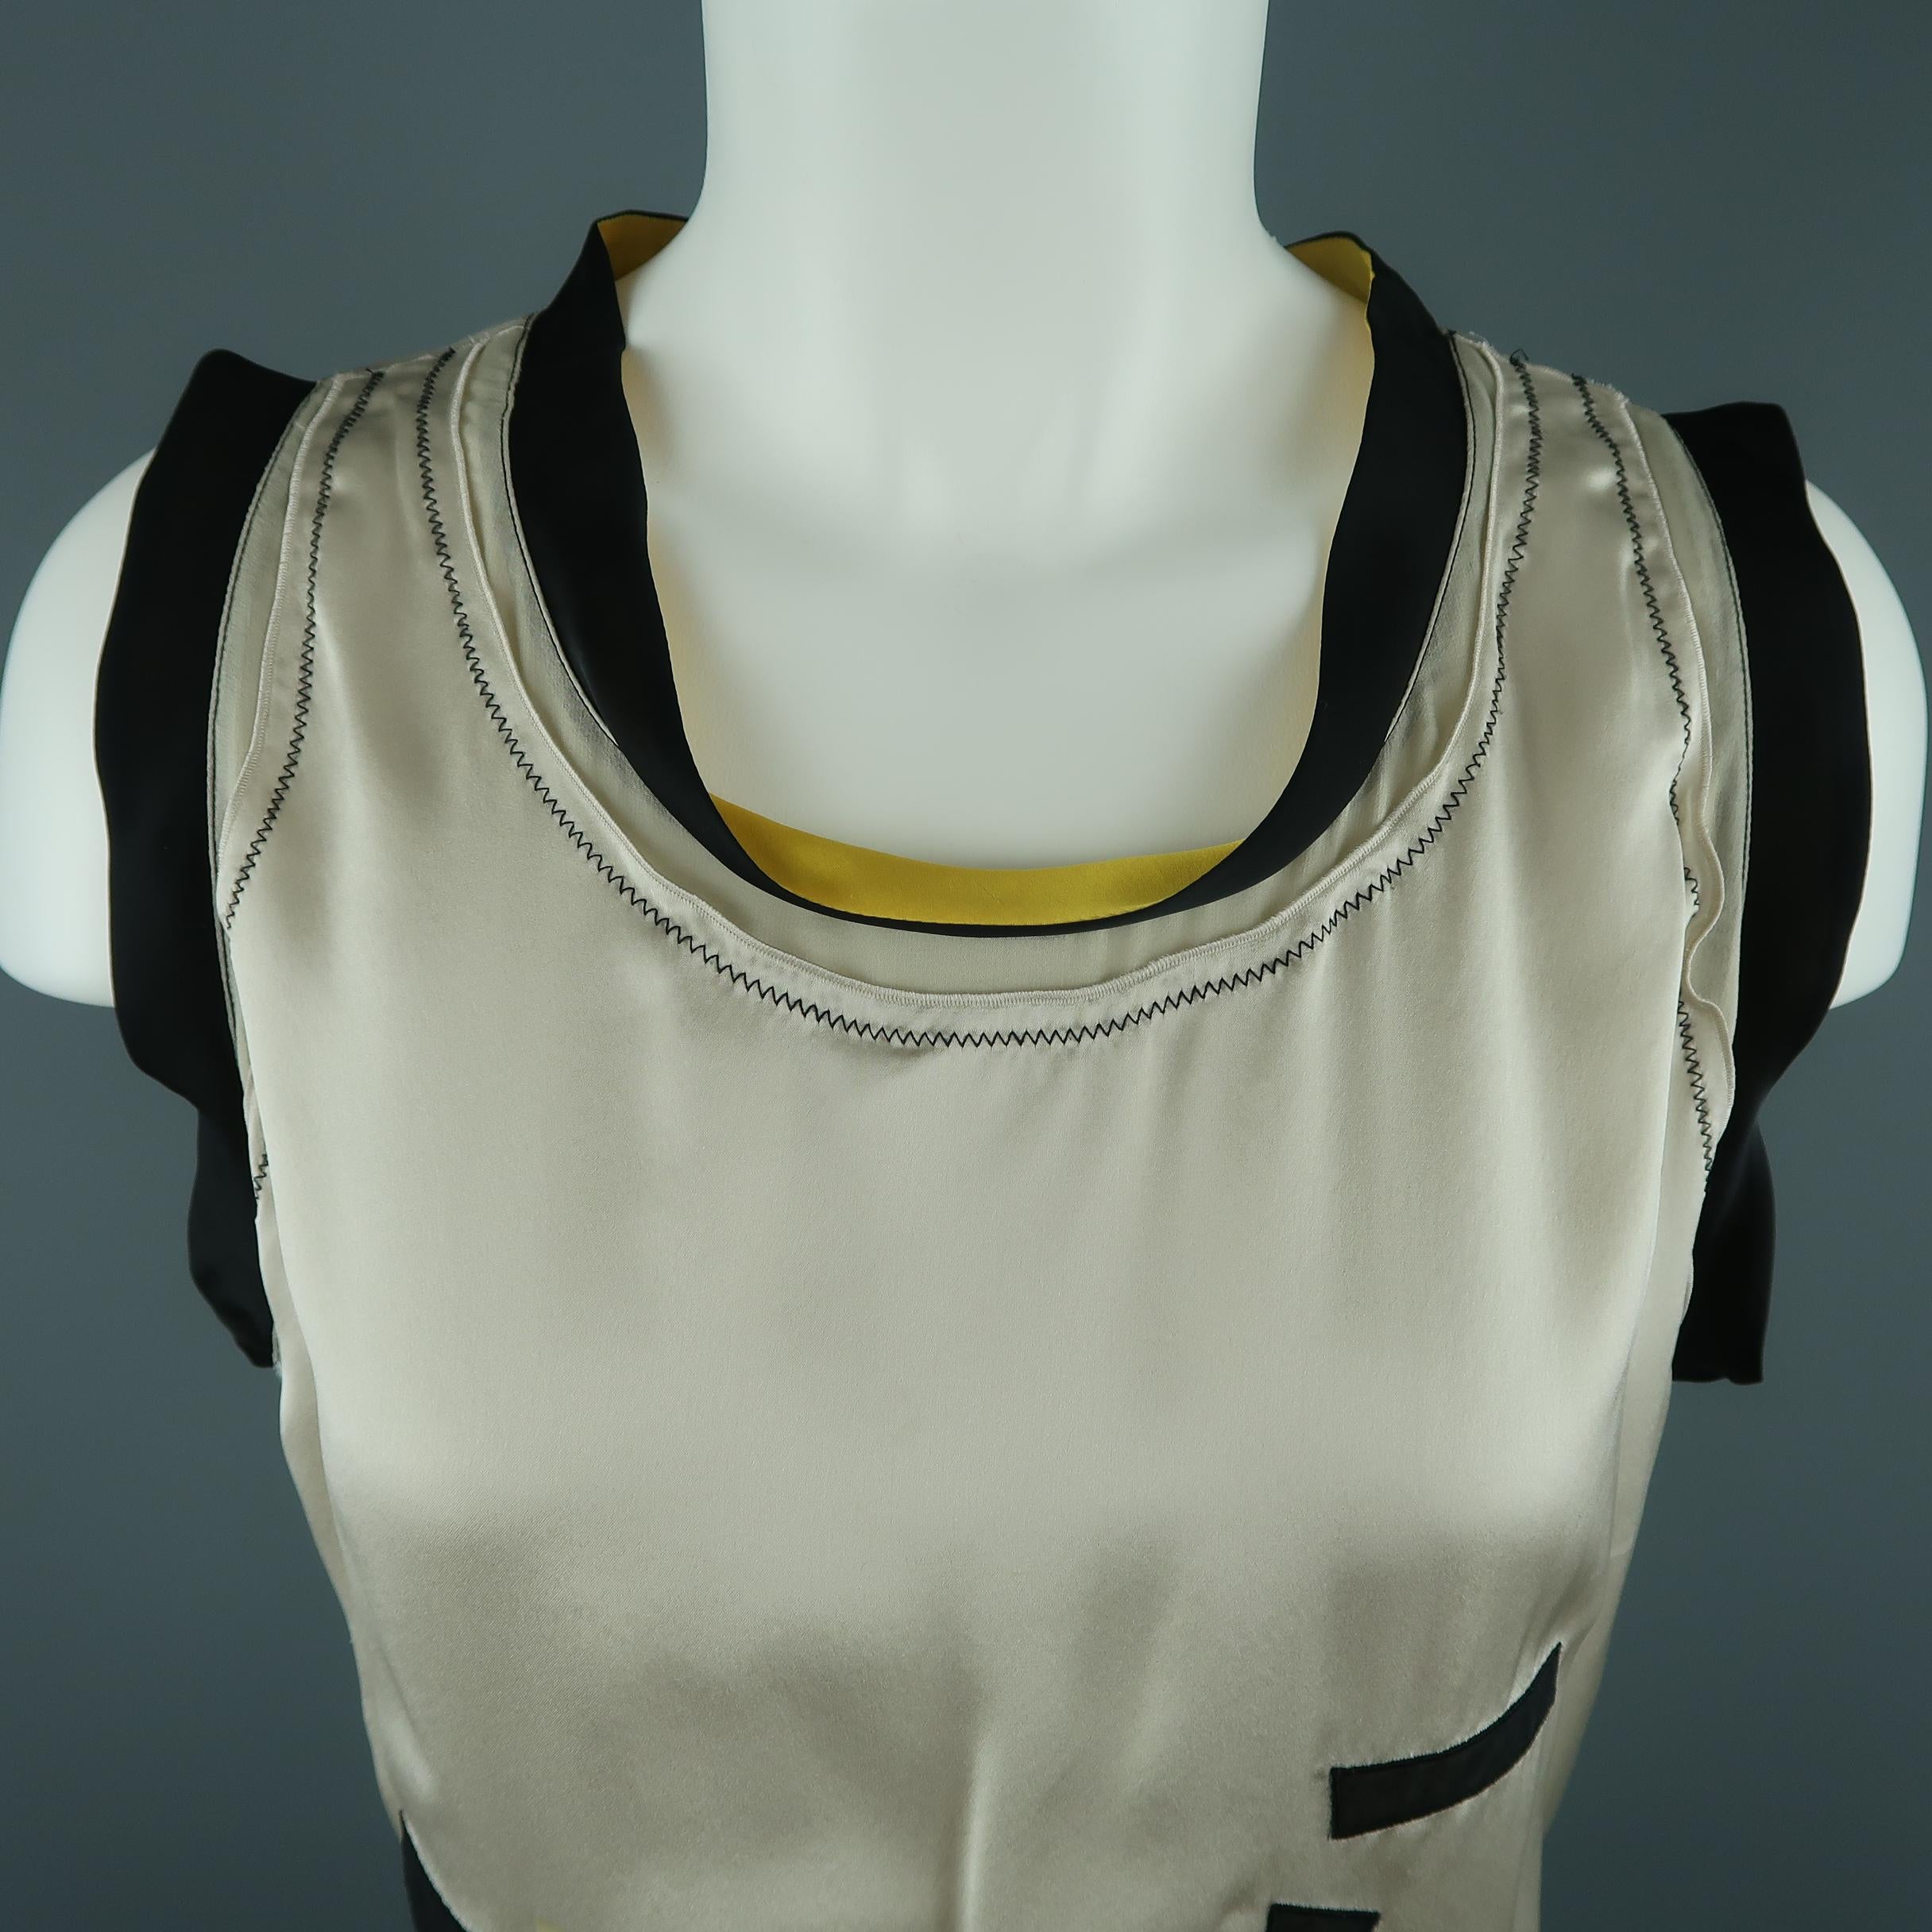 Sleeveless BOTTEGA VENETA top comes in beige silk satin with black and yellow trim scoop neck, sheer cotton geometric appliques, and chiffon side panels. Made in Italy.
 
Very Good Pre-Owned Condition.
Marked: IT 44
 
Measurements:
 
Shoulder: 14